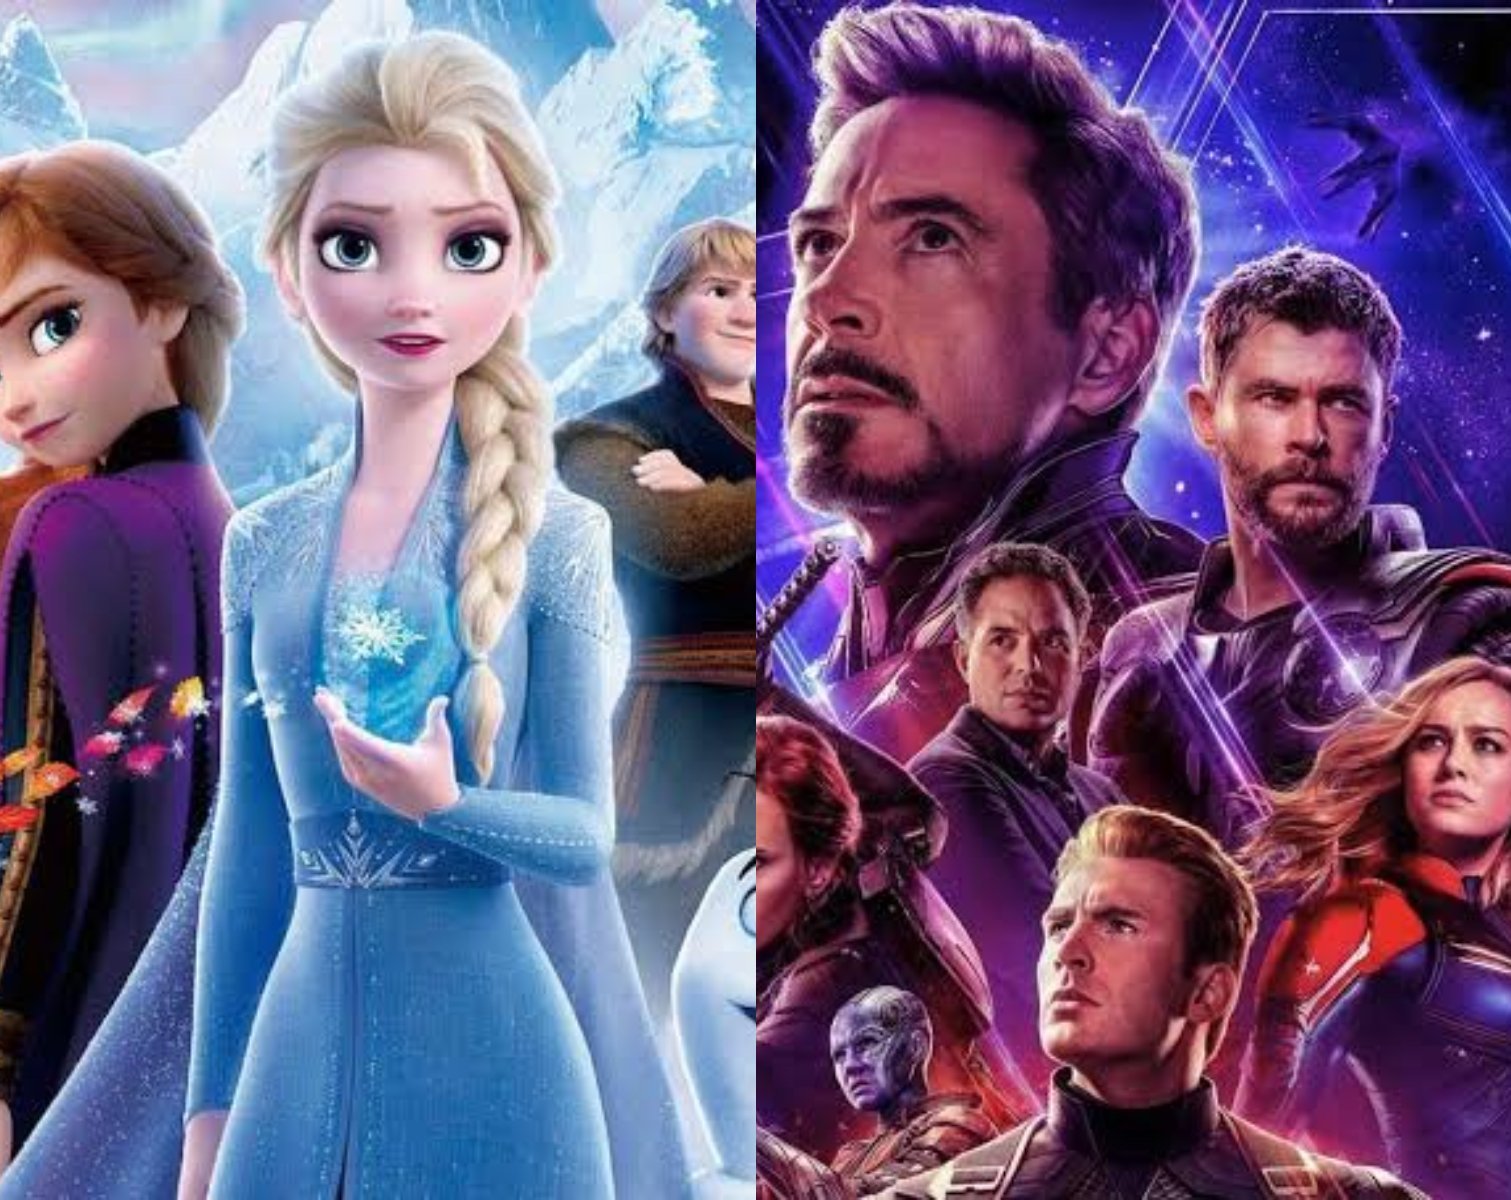 global box office had its biggest year in 2019 thanks to disney